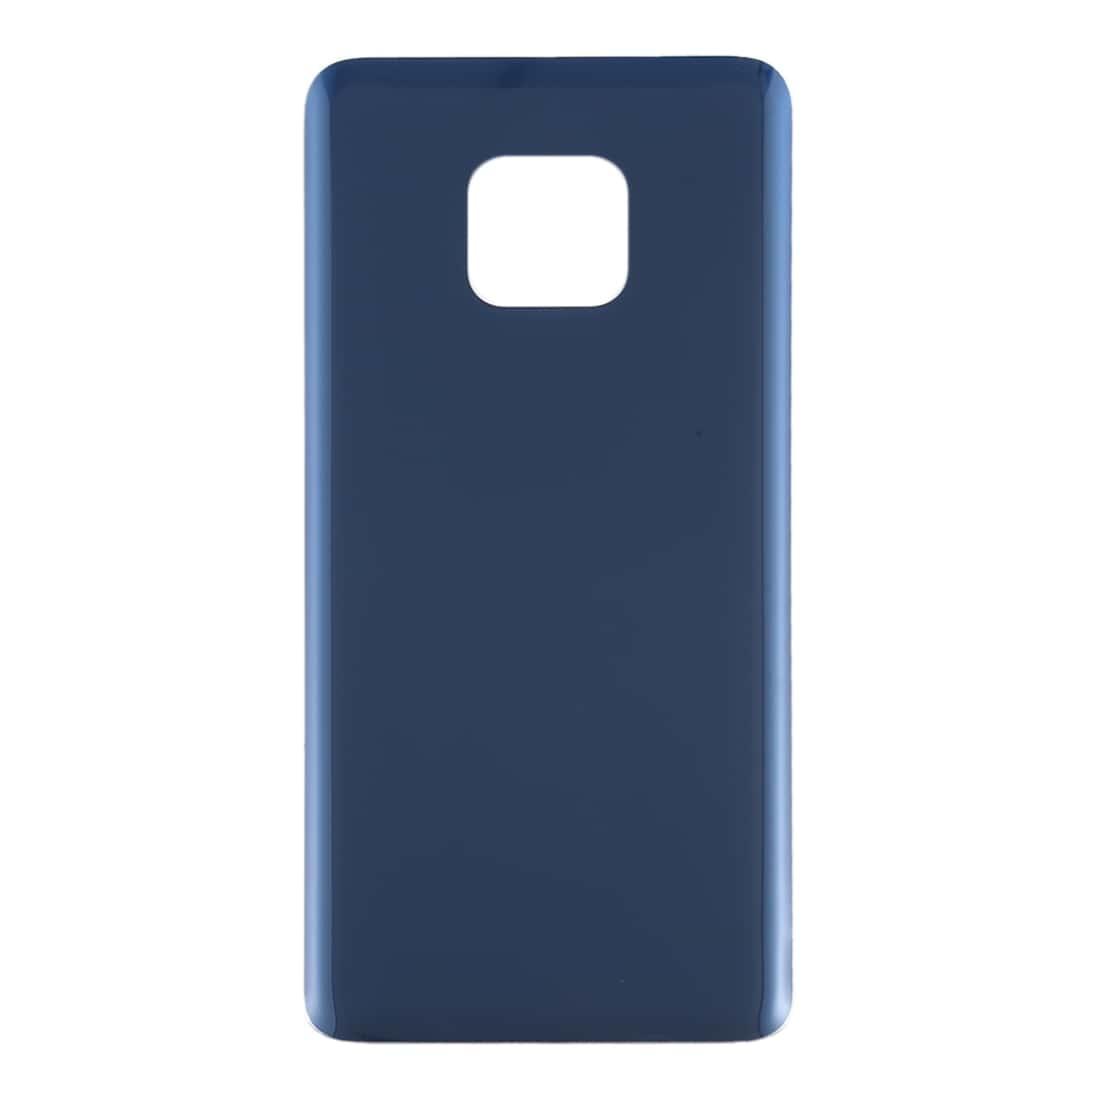 Back Glass Panel for  Huawei Mate 20 Pro Dark Blue